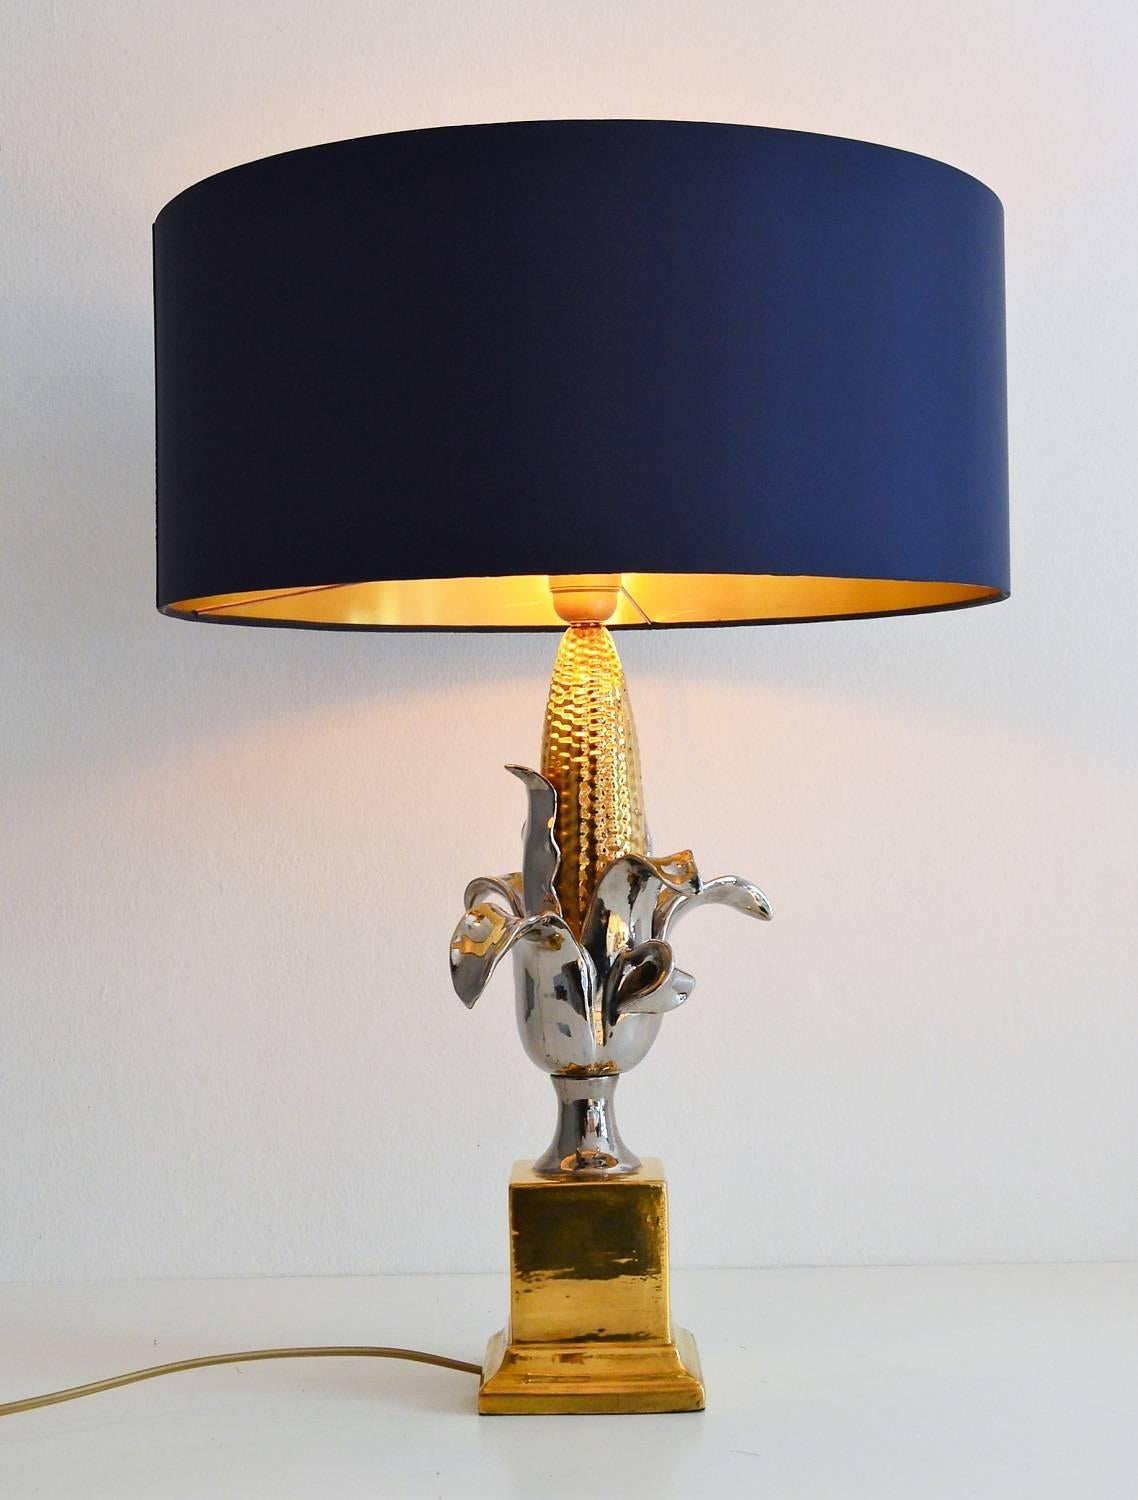 A beautiful table lamp made of ceramic and painted in shiny gold and silver.
Full Hollywood Regency style.
The lamp have been restored and adapted with new wire and bulb holder as well as with new lamp shade: outside royal blue, inside with gold